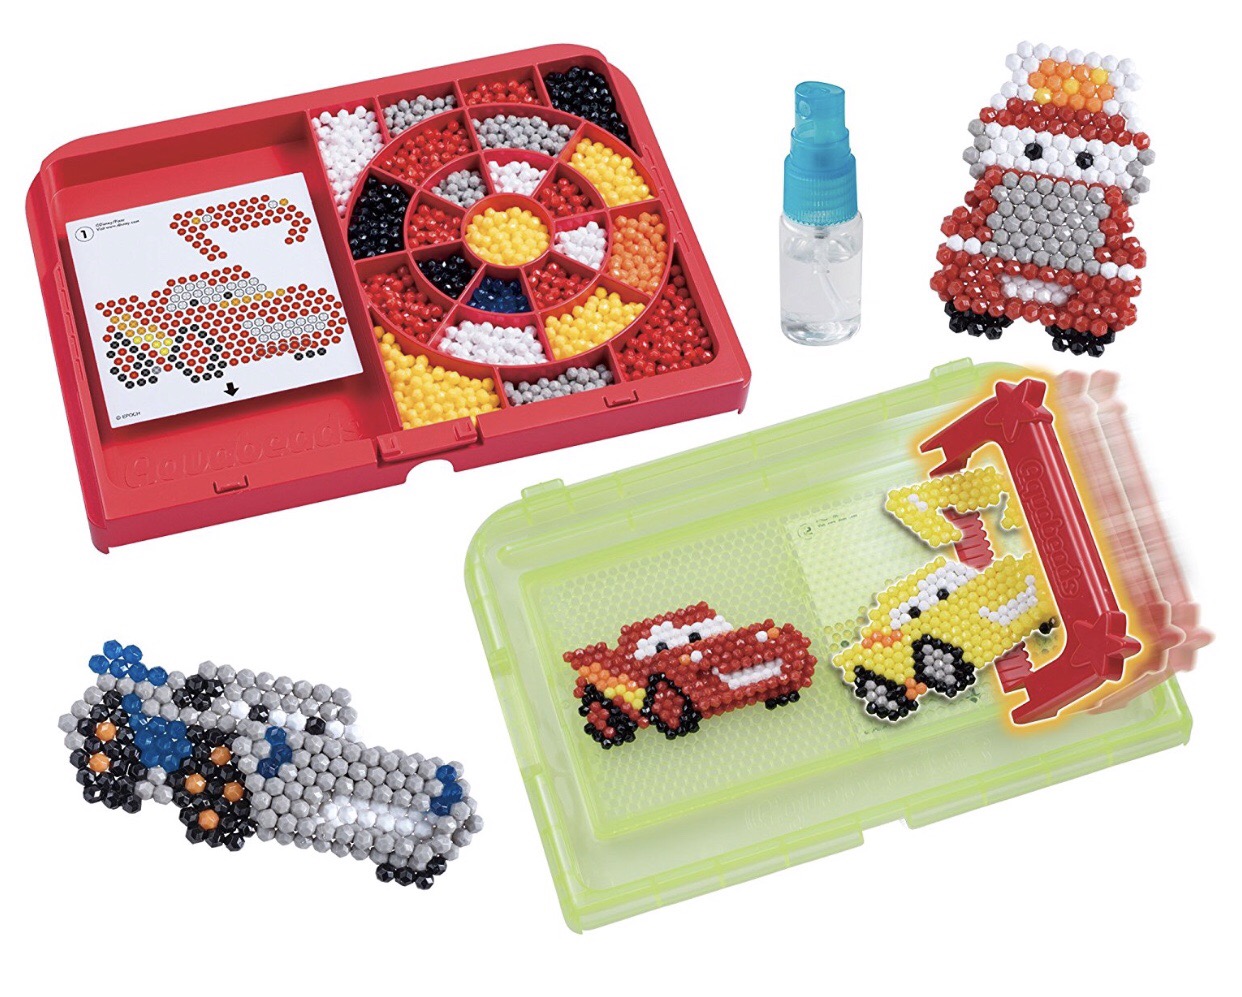 Road-Testing the Aquabeads Cars 3 Playset